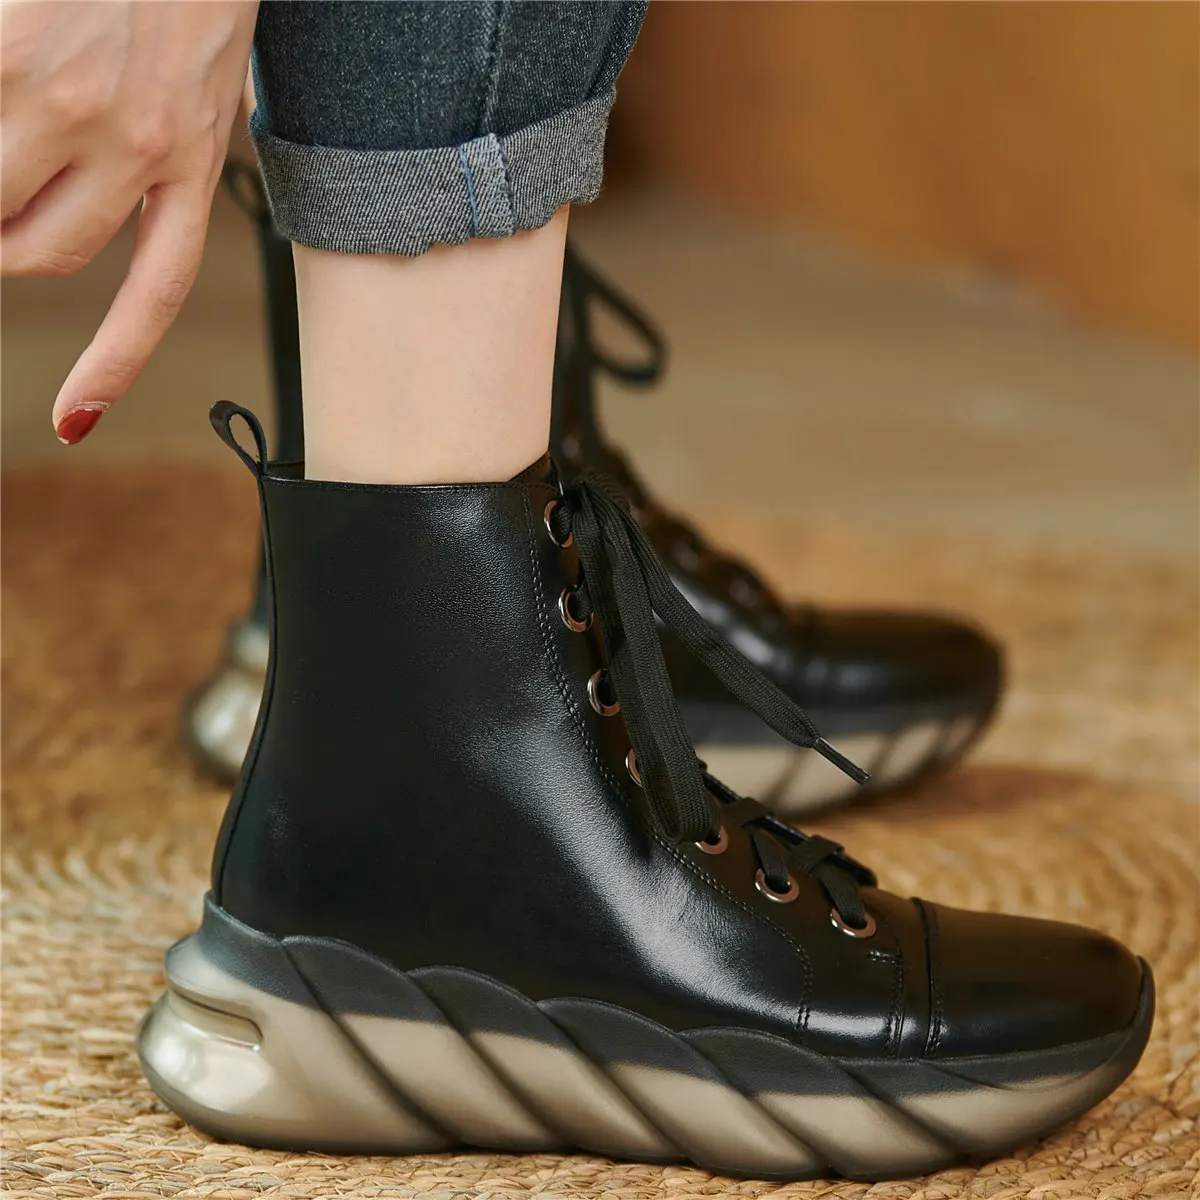 

Platform Oxfords Shoes Women Lace Up Genuine Leather Med Heel Riding Boots Female Hi-Top Round Toe Fashion Sneakers Casual Shoes